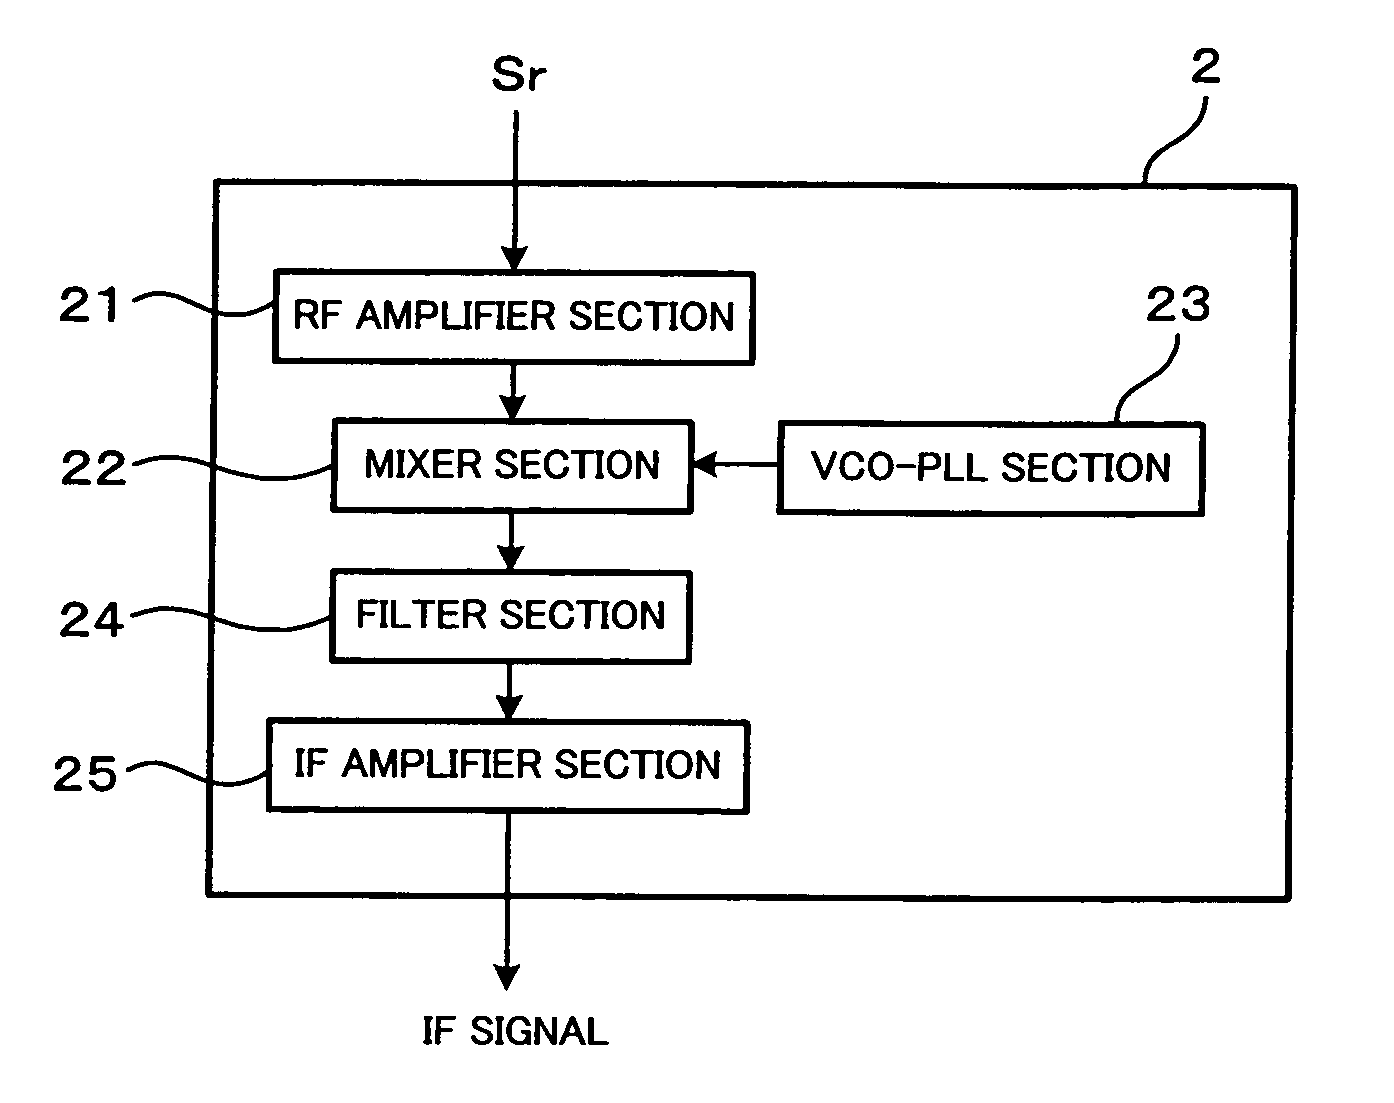 Digital demodulating apparatus, controlling method of the apparatus, computer program product for the apparatus, recording medium recording thereon the product, and digital receiver